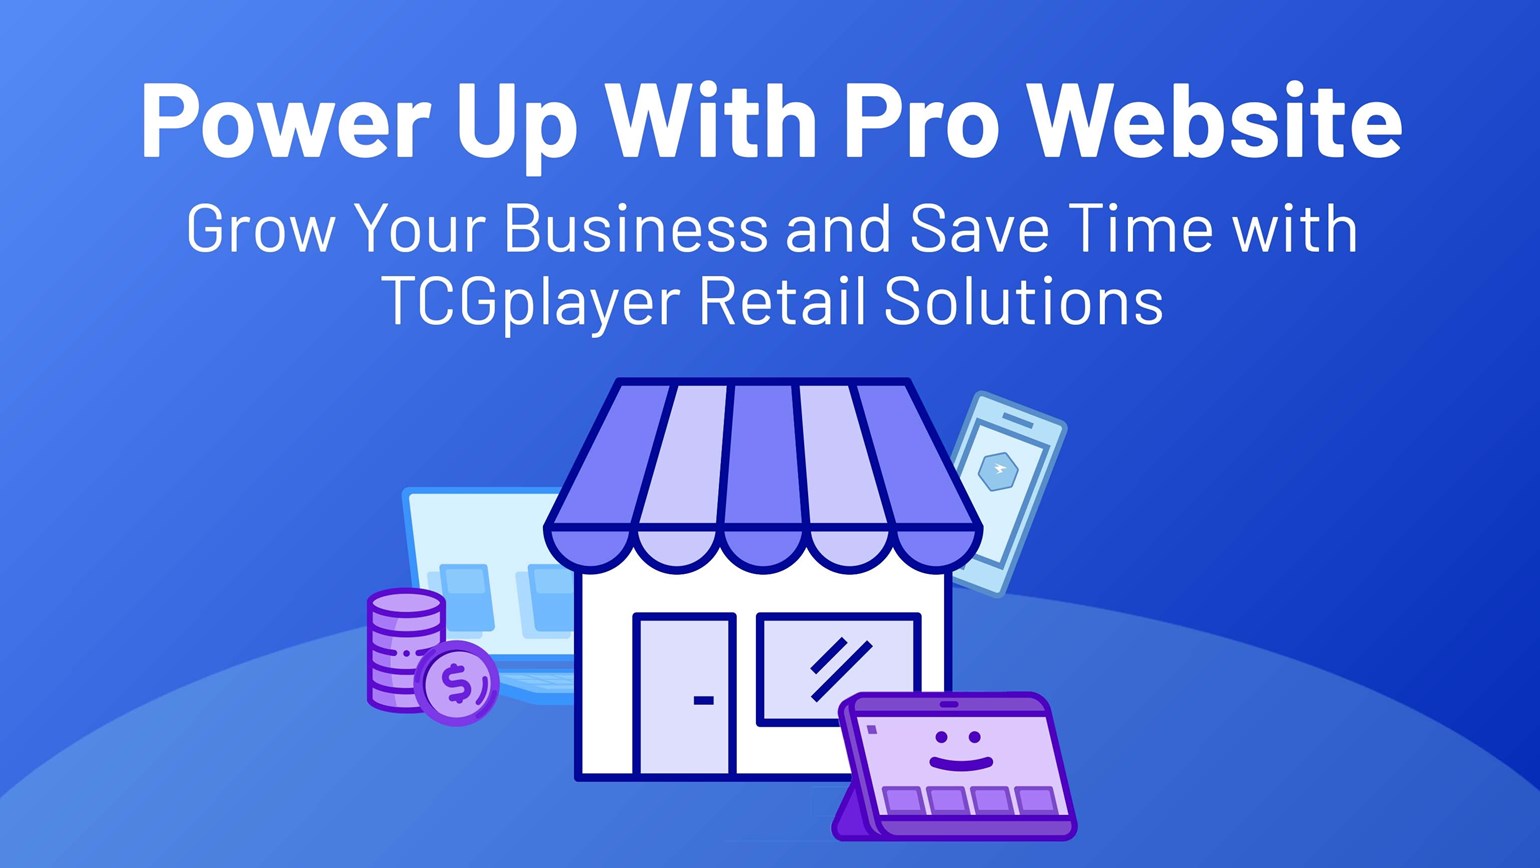 Power Up With Pro Website: Grow Your Business and Save Time with TCGplayer Retail Solutions